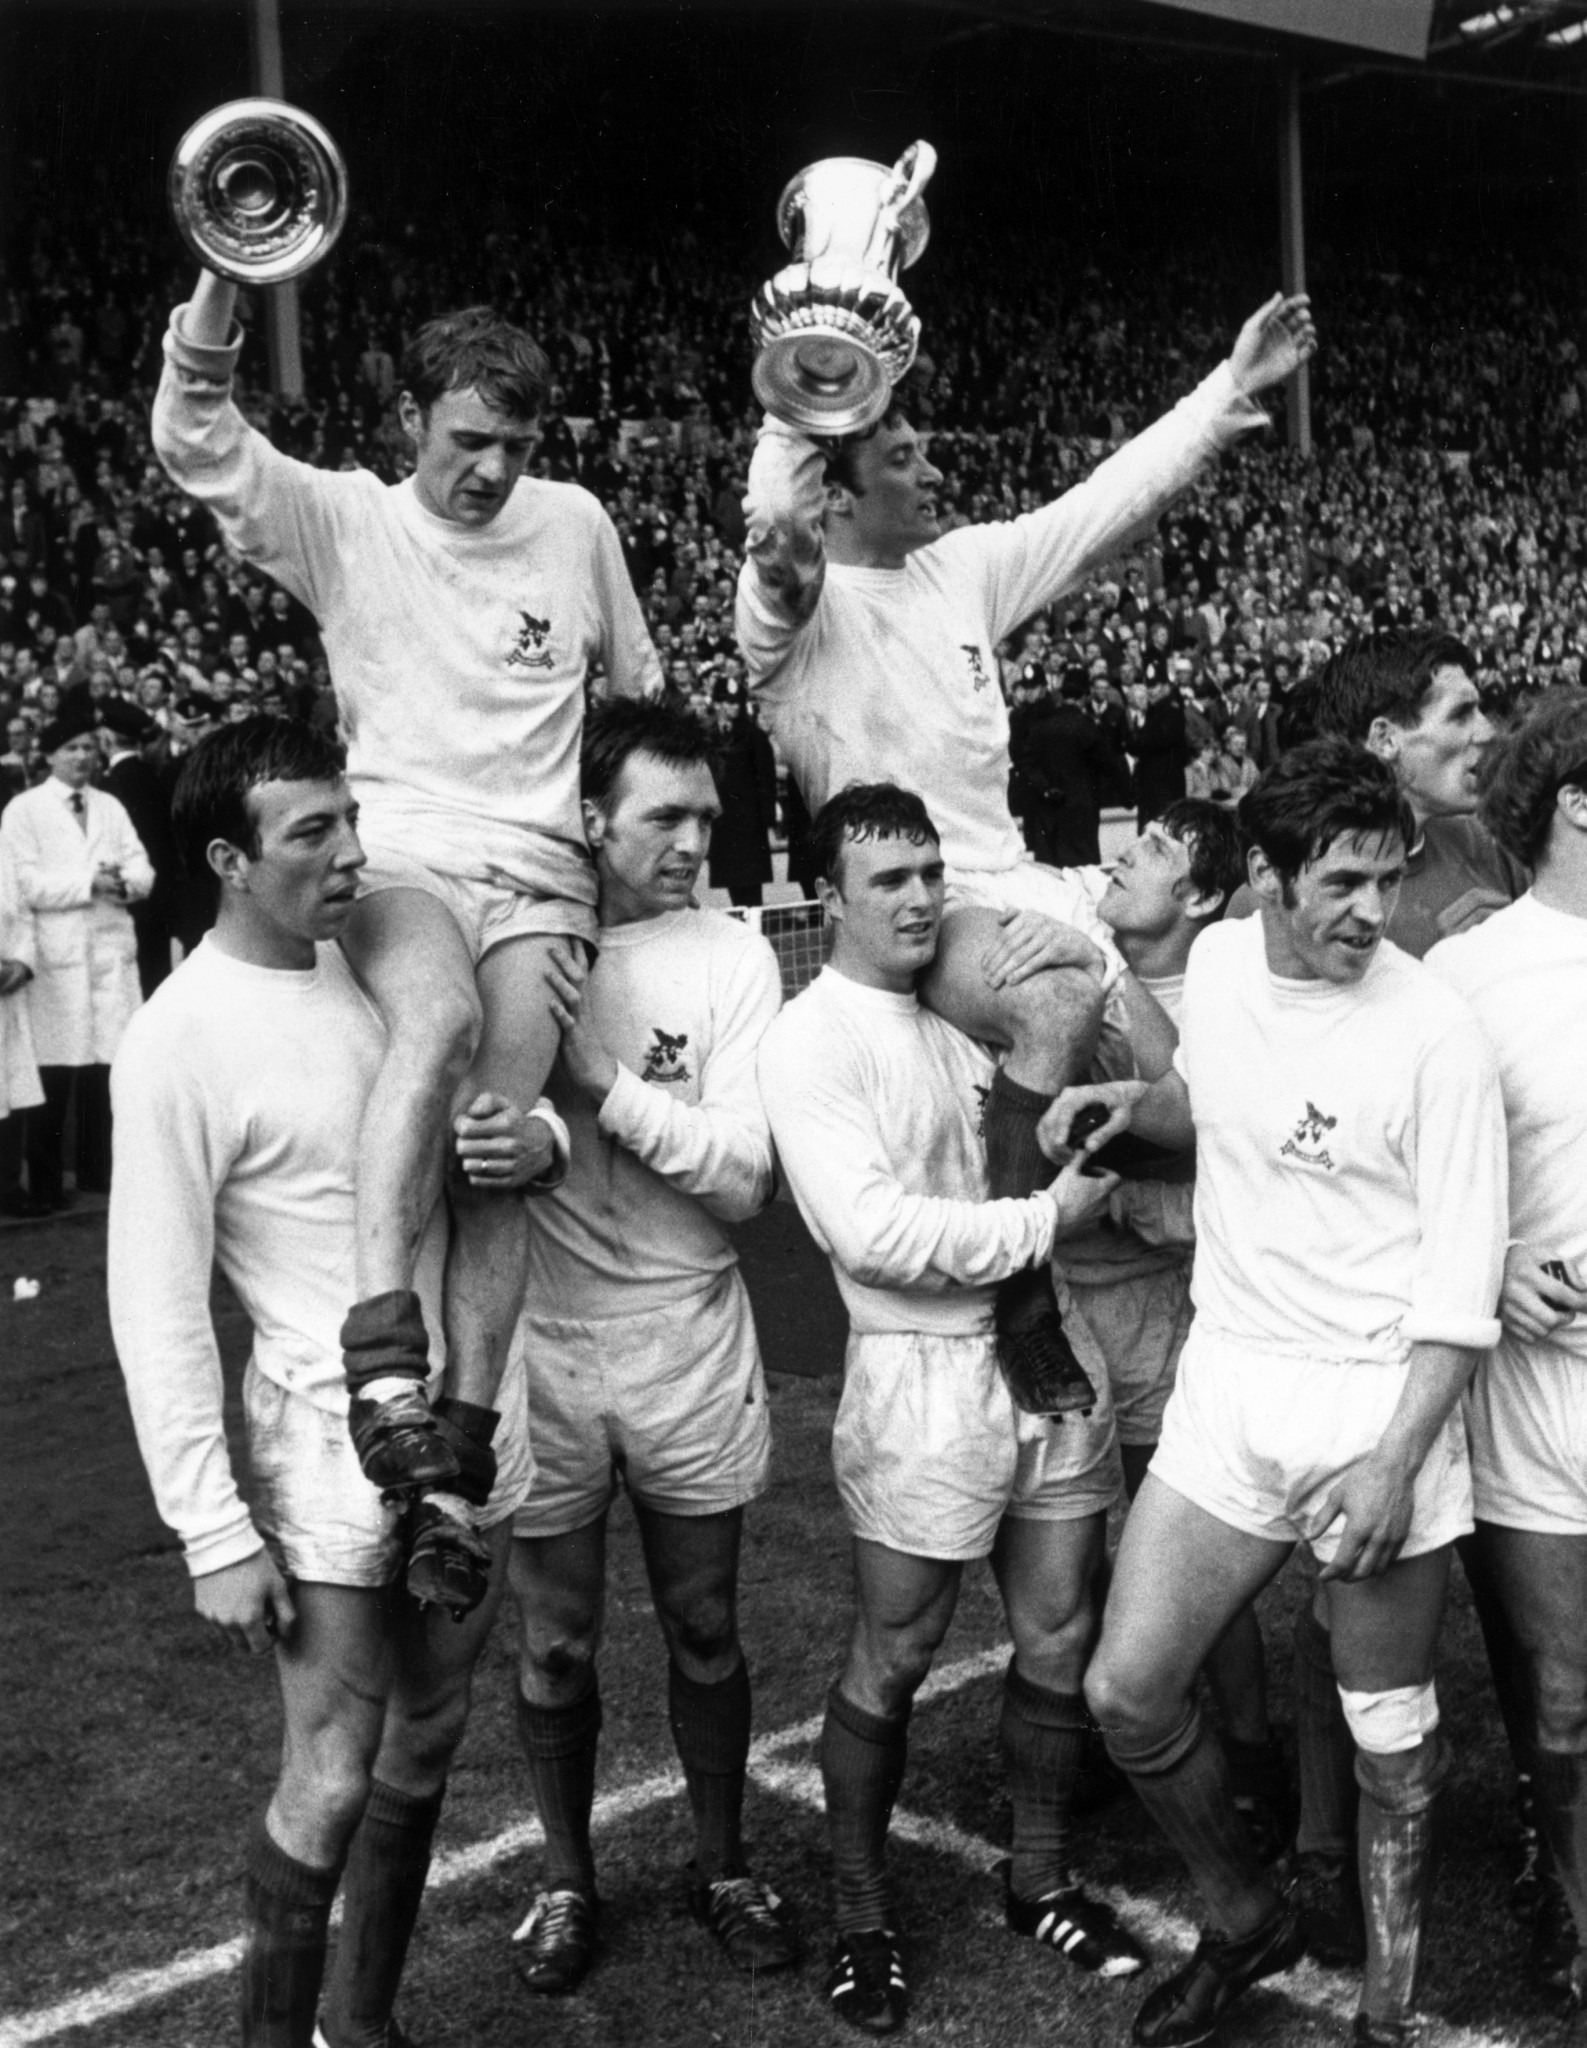 West Bromwich Albion, with goalscorer Jeff Astle third from left, celebrate their 1-0 win over Everton in the 1968 FA Cup final. But it was the kick-off that was most exciting...©Getty Images